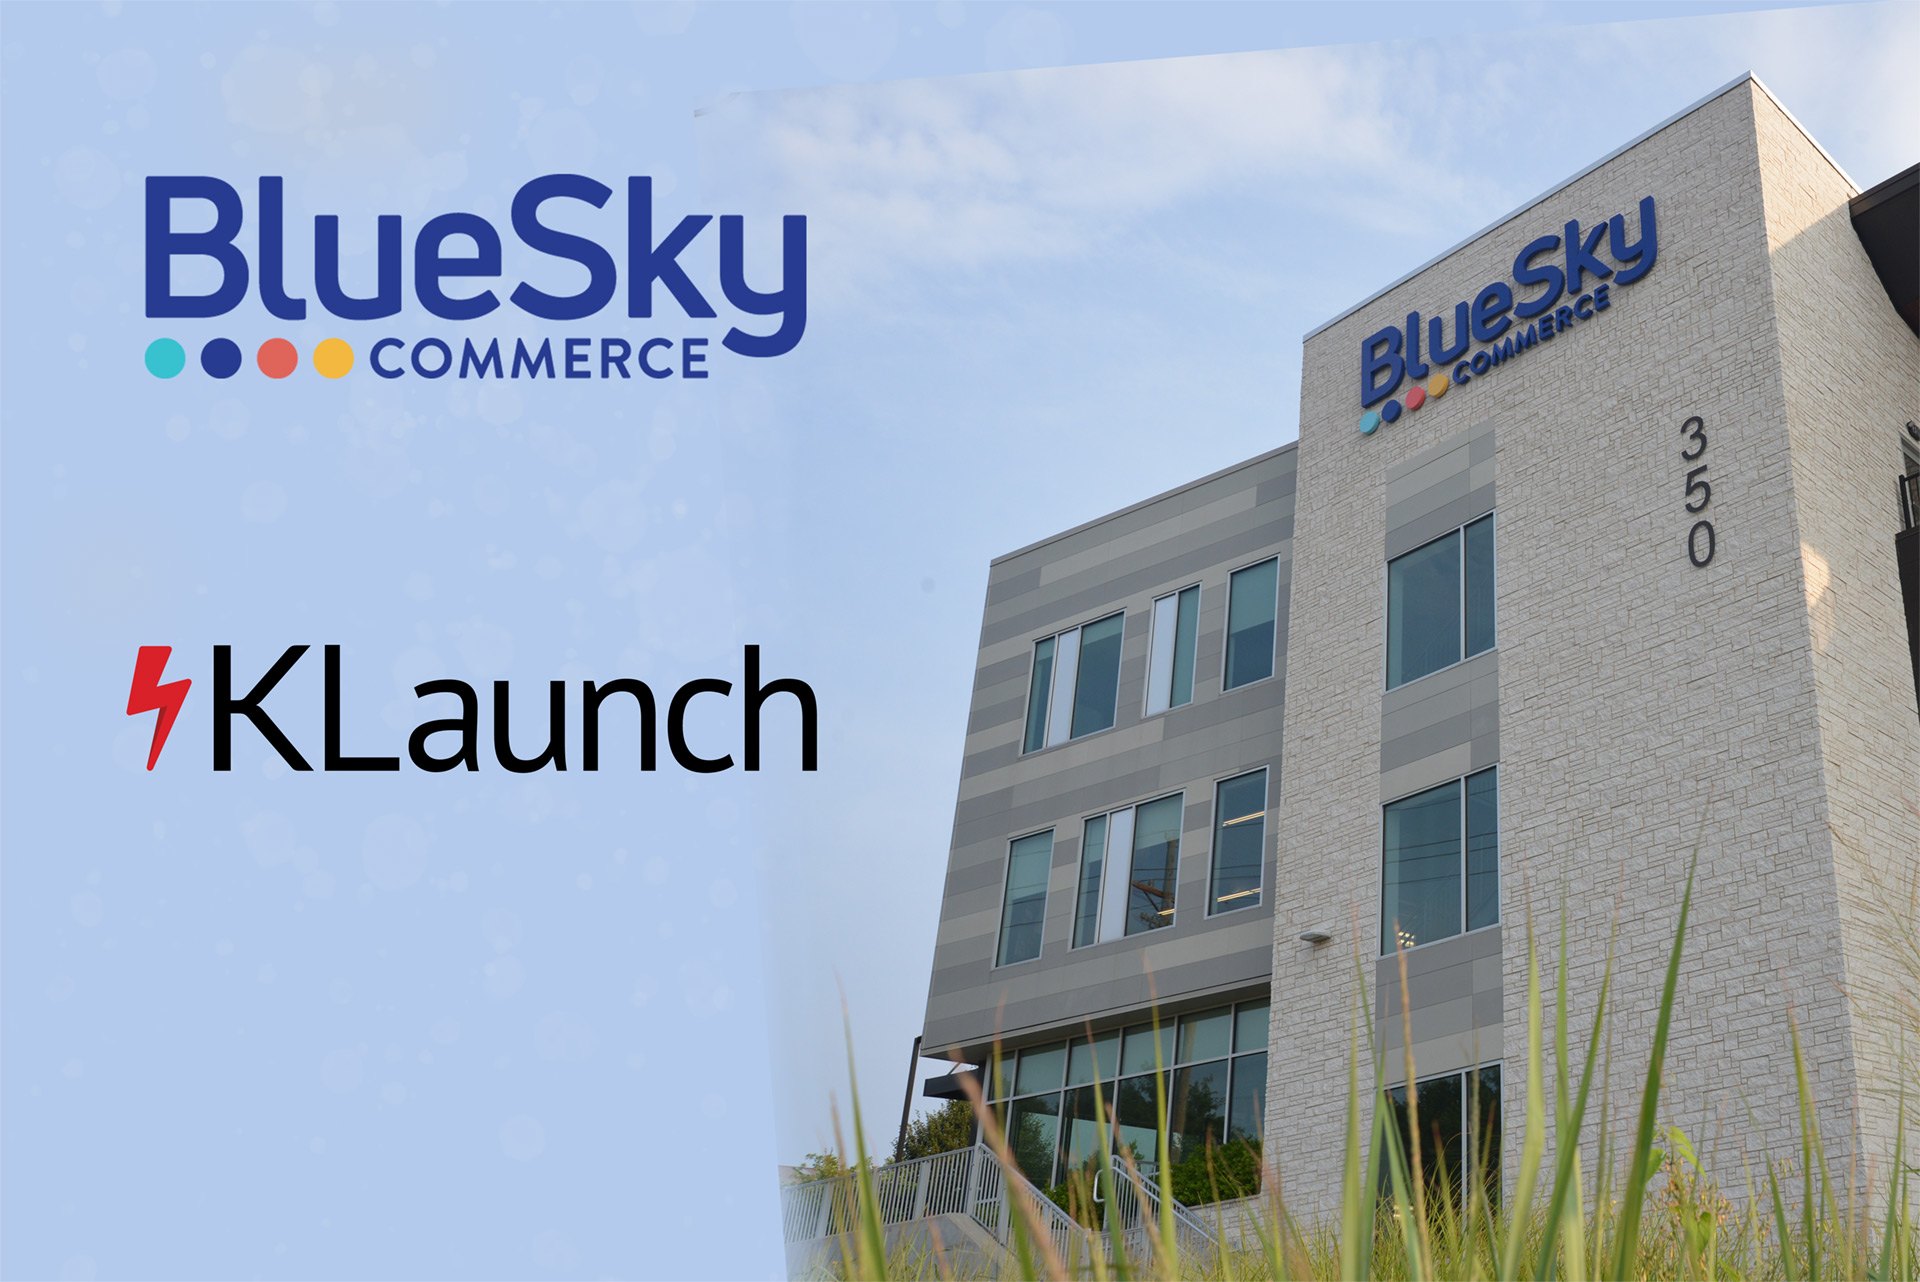 BlueSky Commerce and Kerauno Announce Strategic Partnership in the SMS Industry